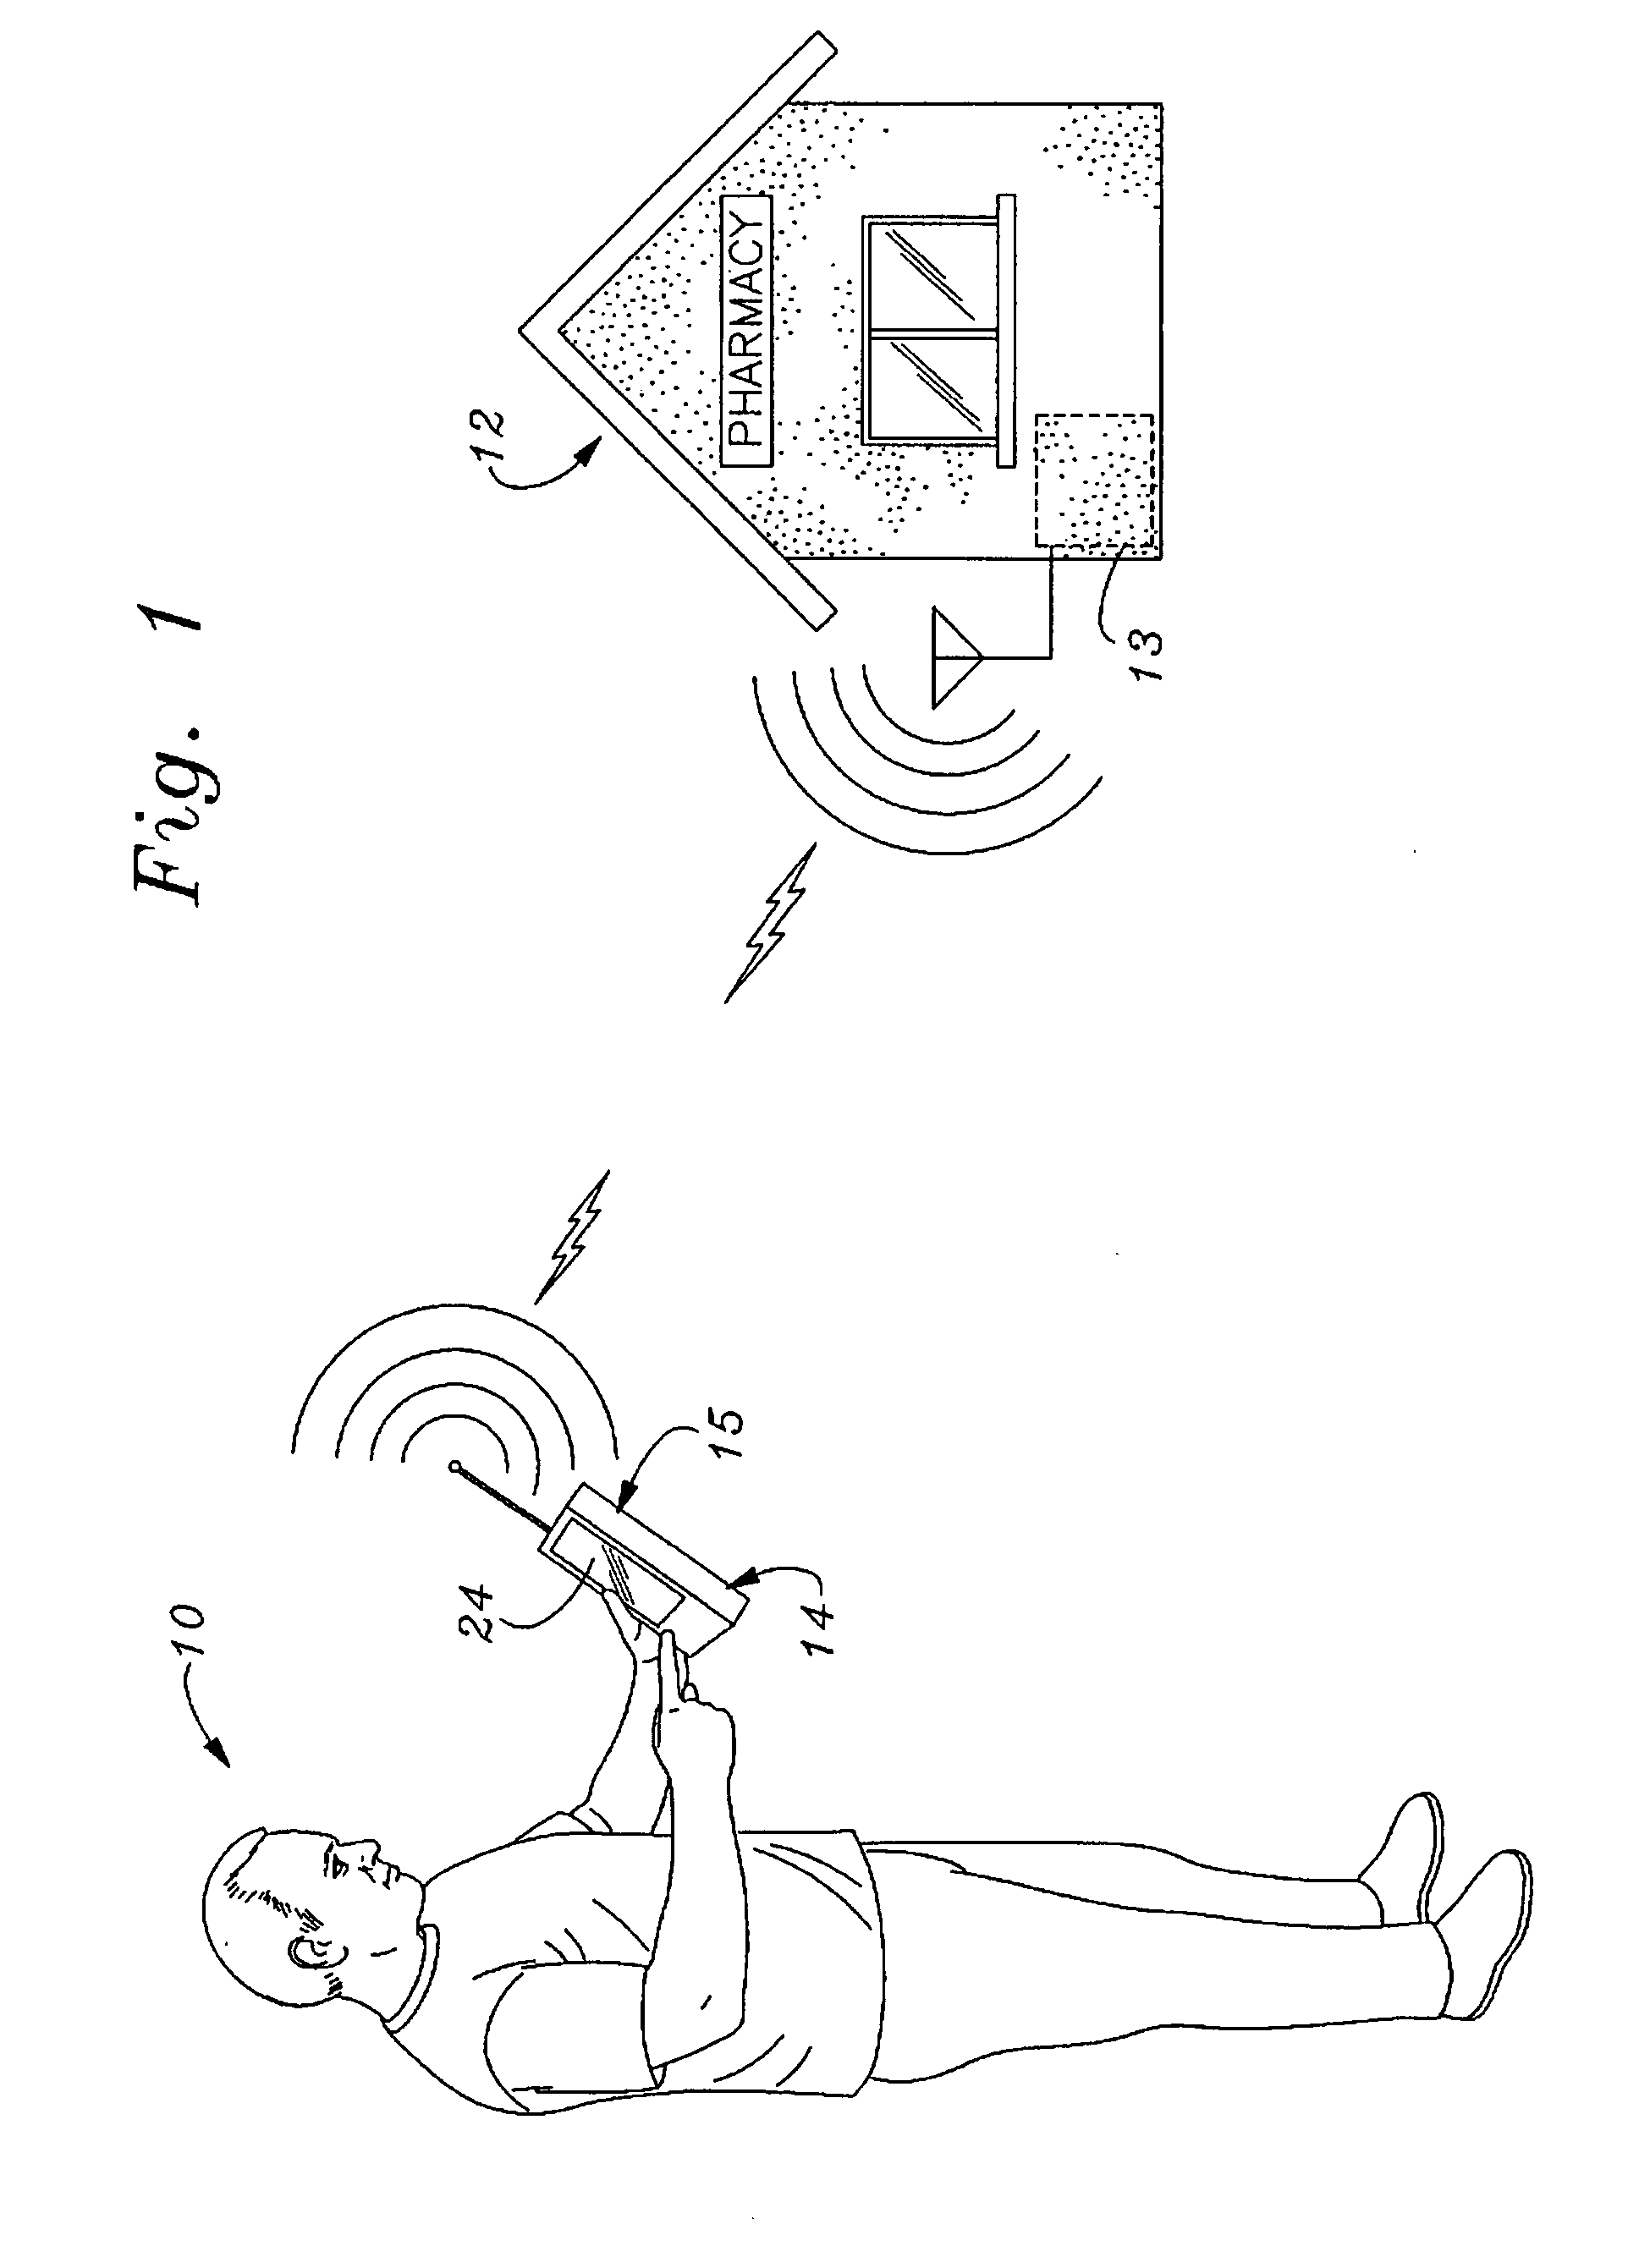 Apparatus for & method of creating and transmitting a prescription to a drug dispensing location